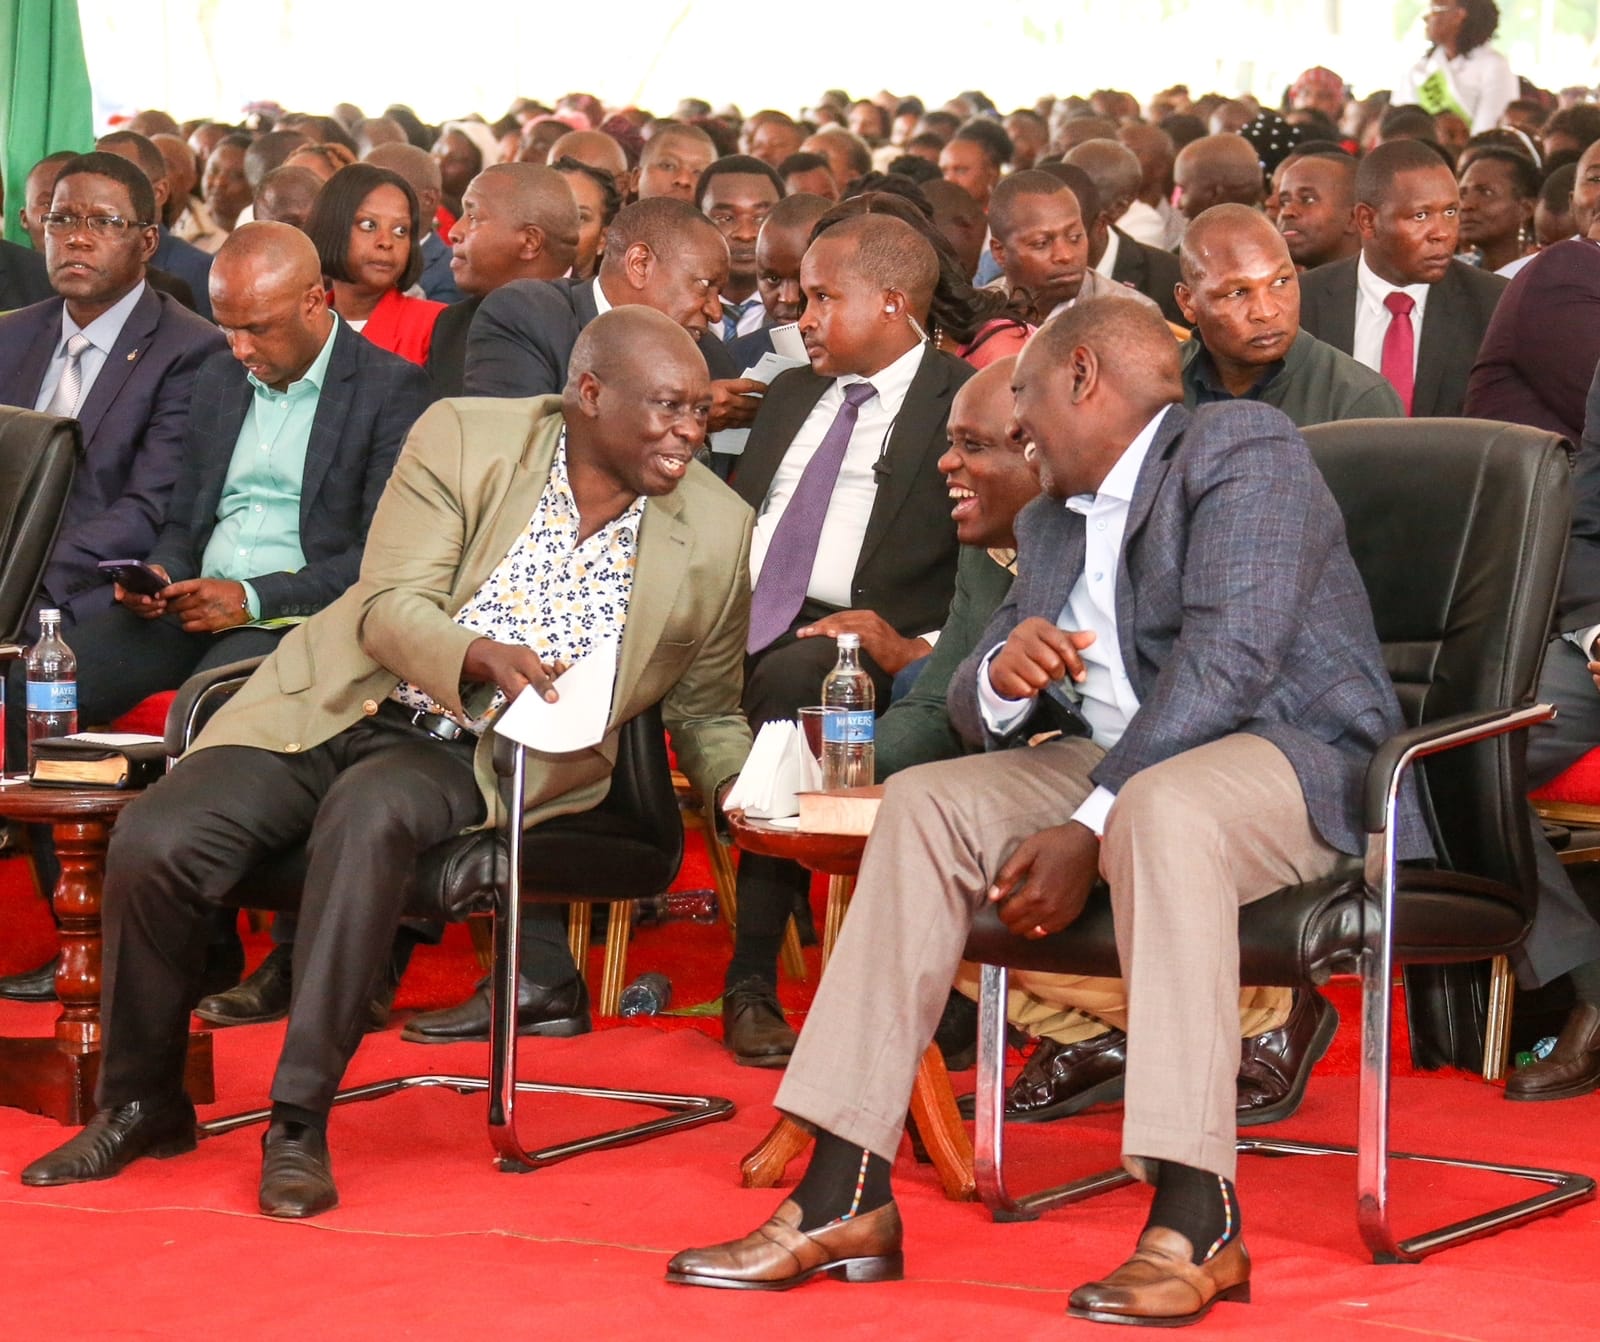 File Image of President William Ruto, his Deputy Rigathi Gachagua, and Dennis Itumbi having a chat.